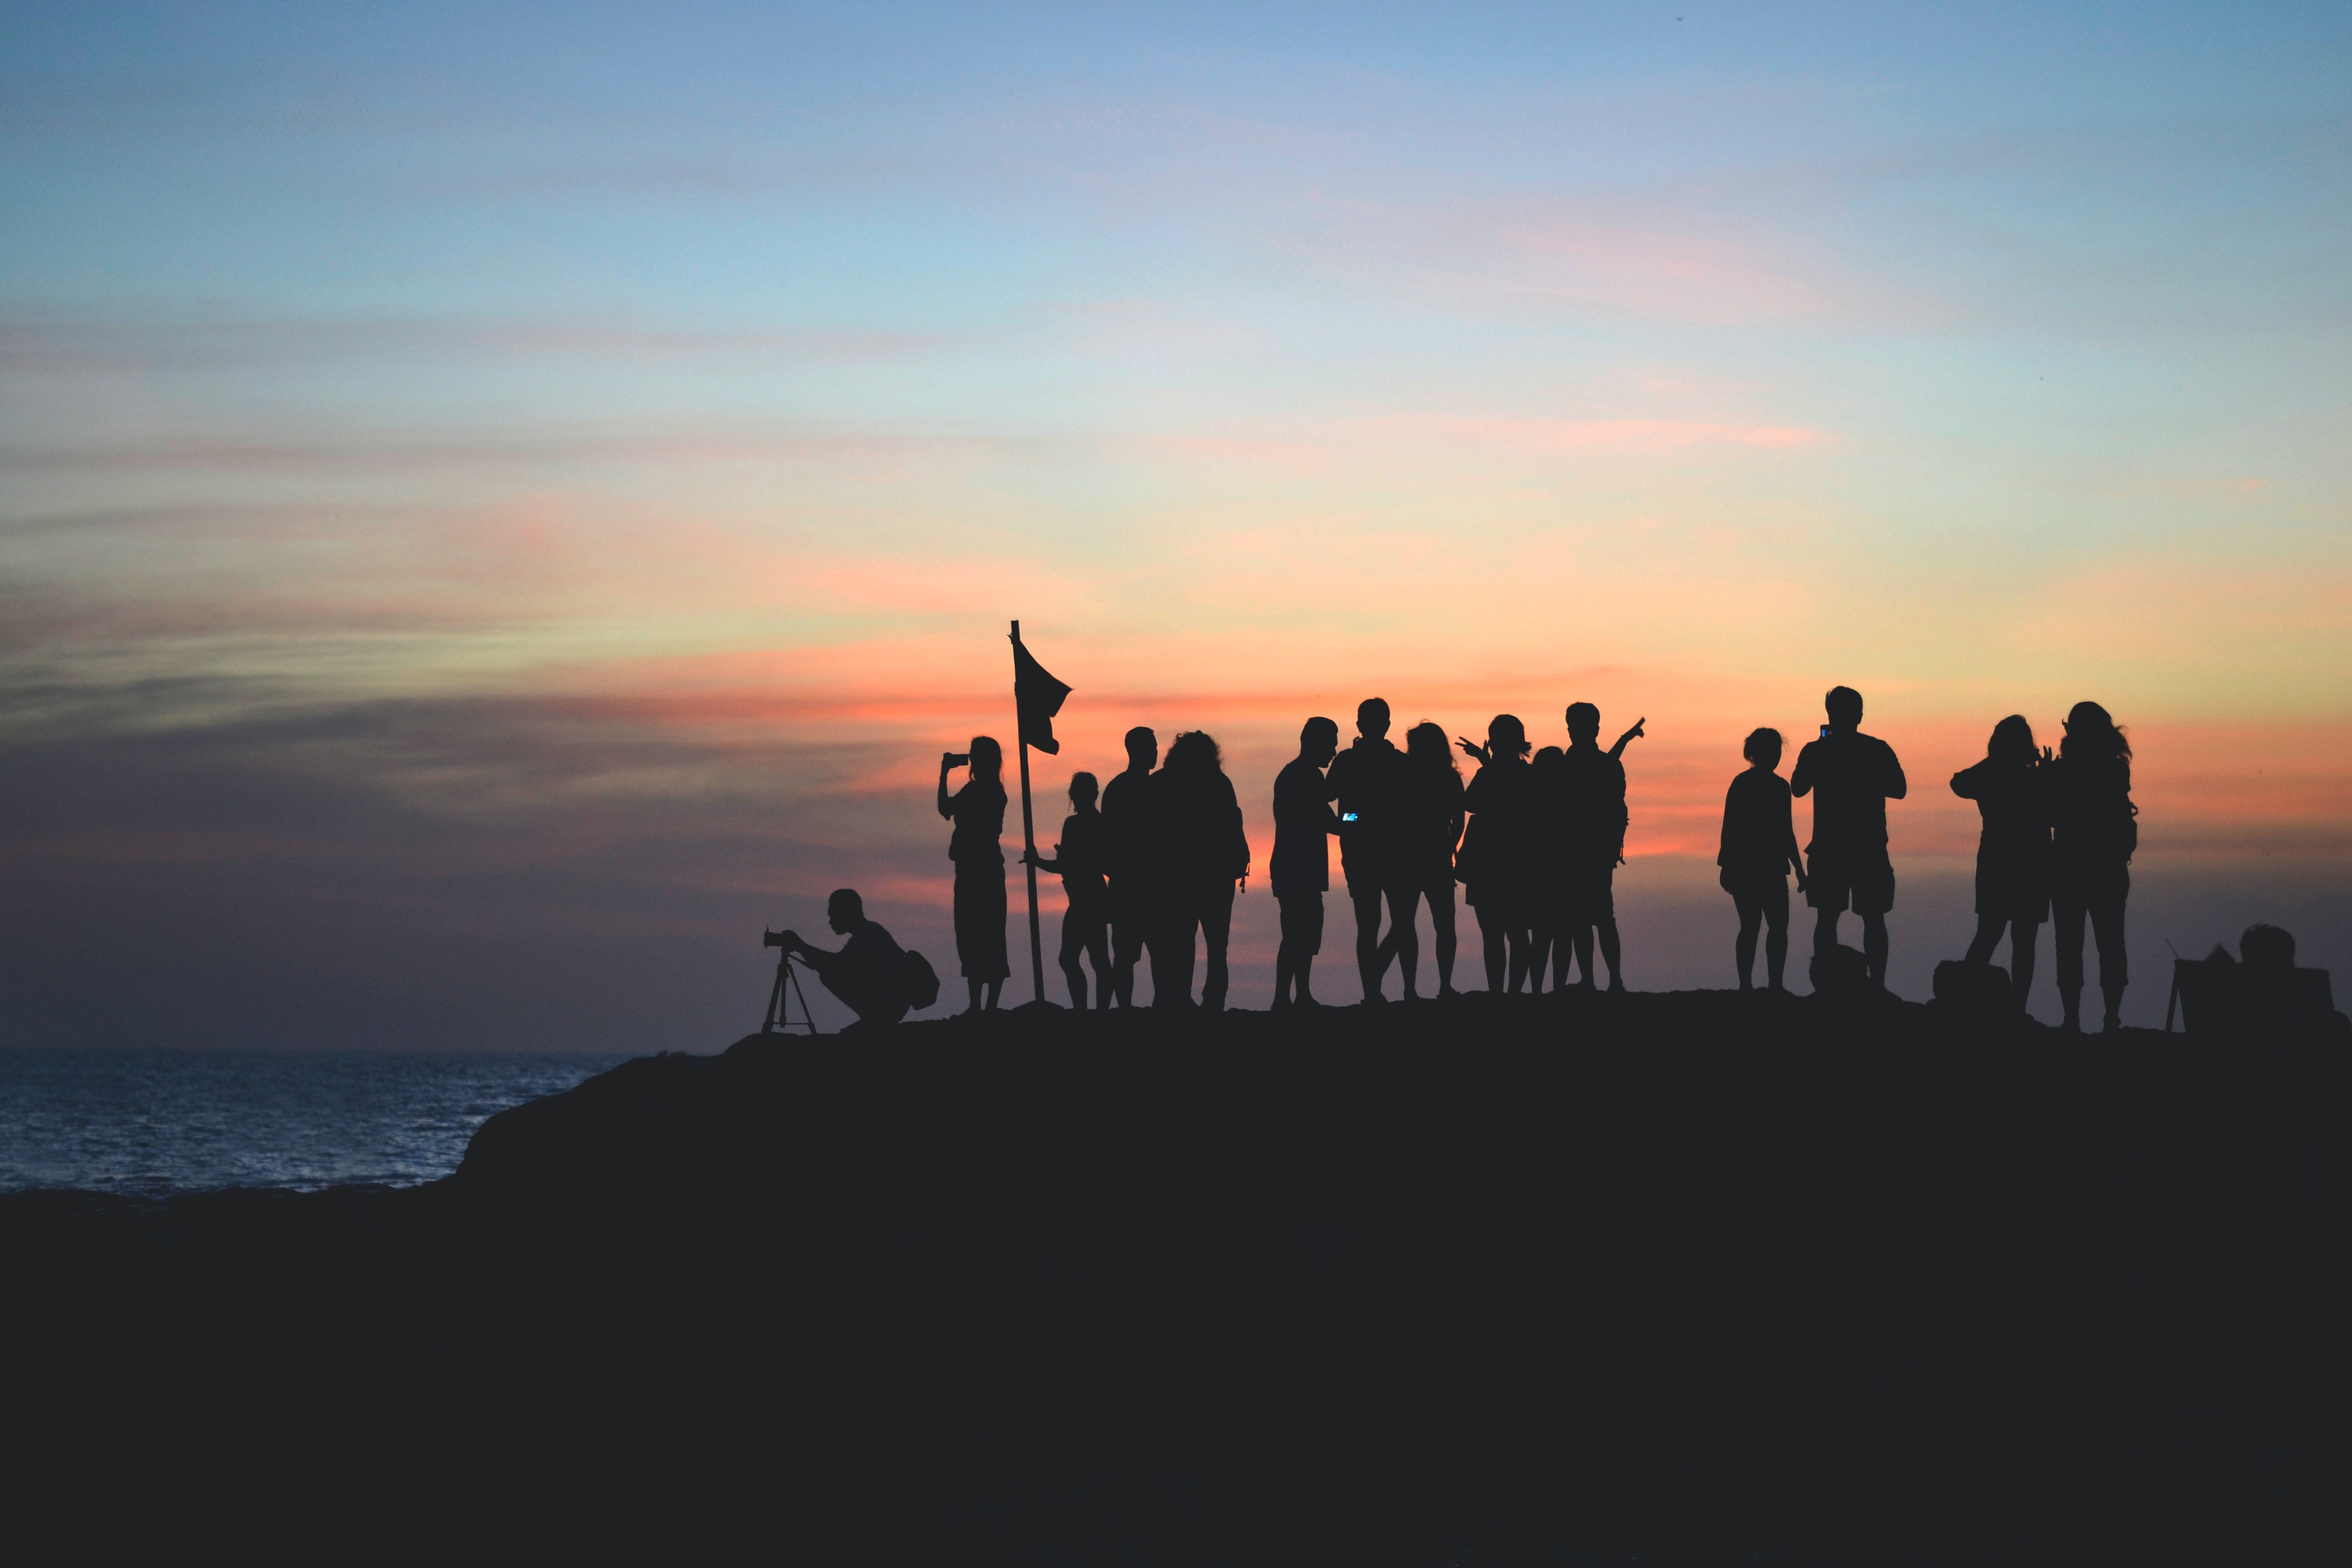 A group of people on top of a mountain in the sunset.